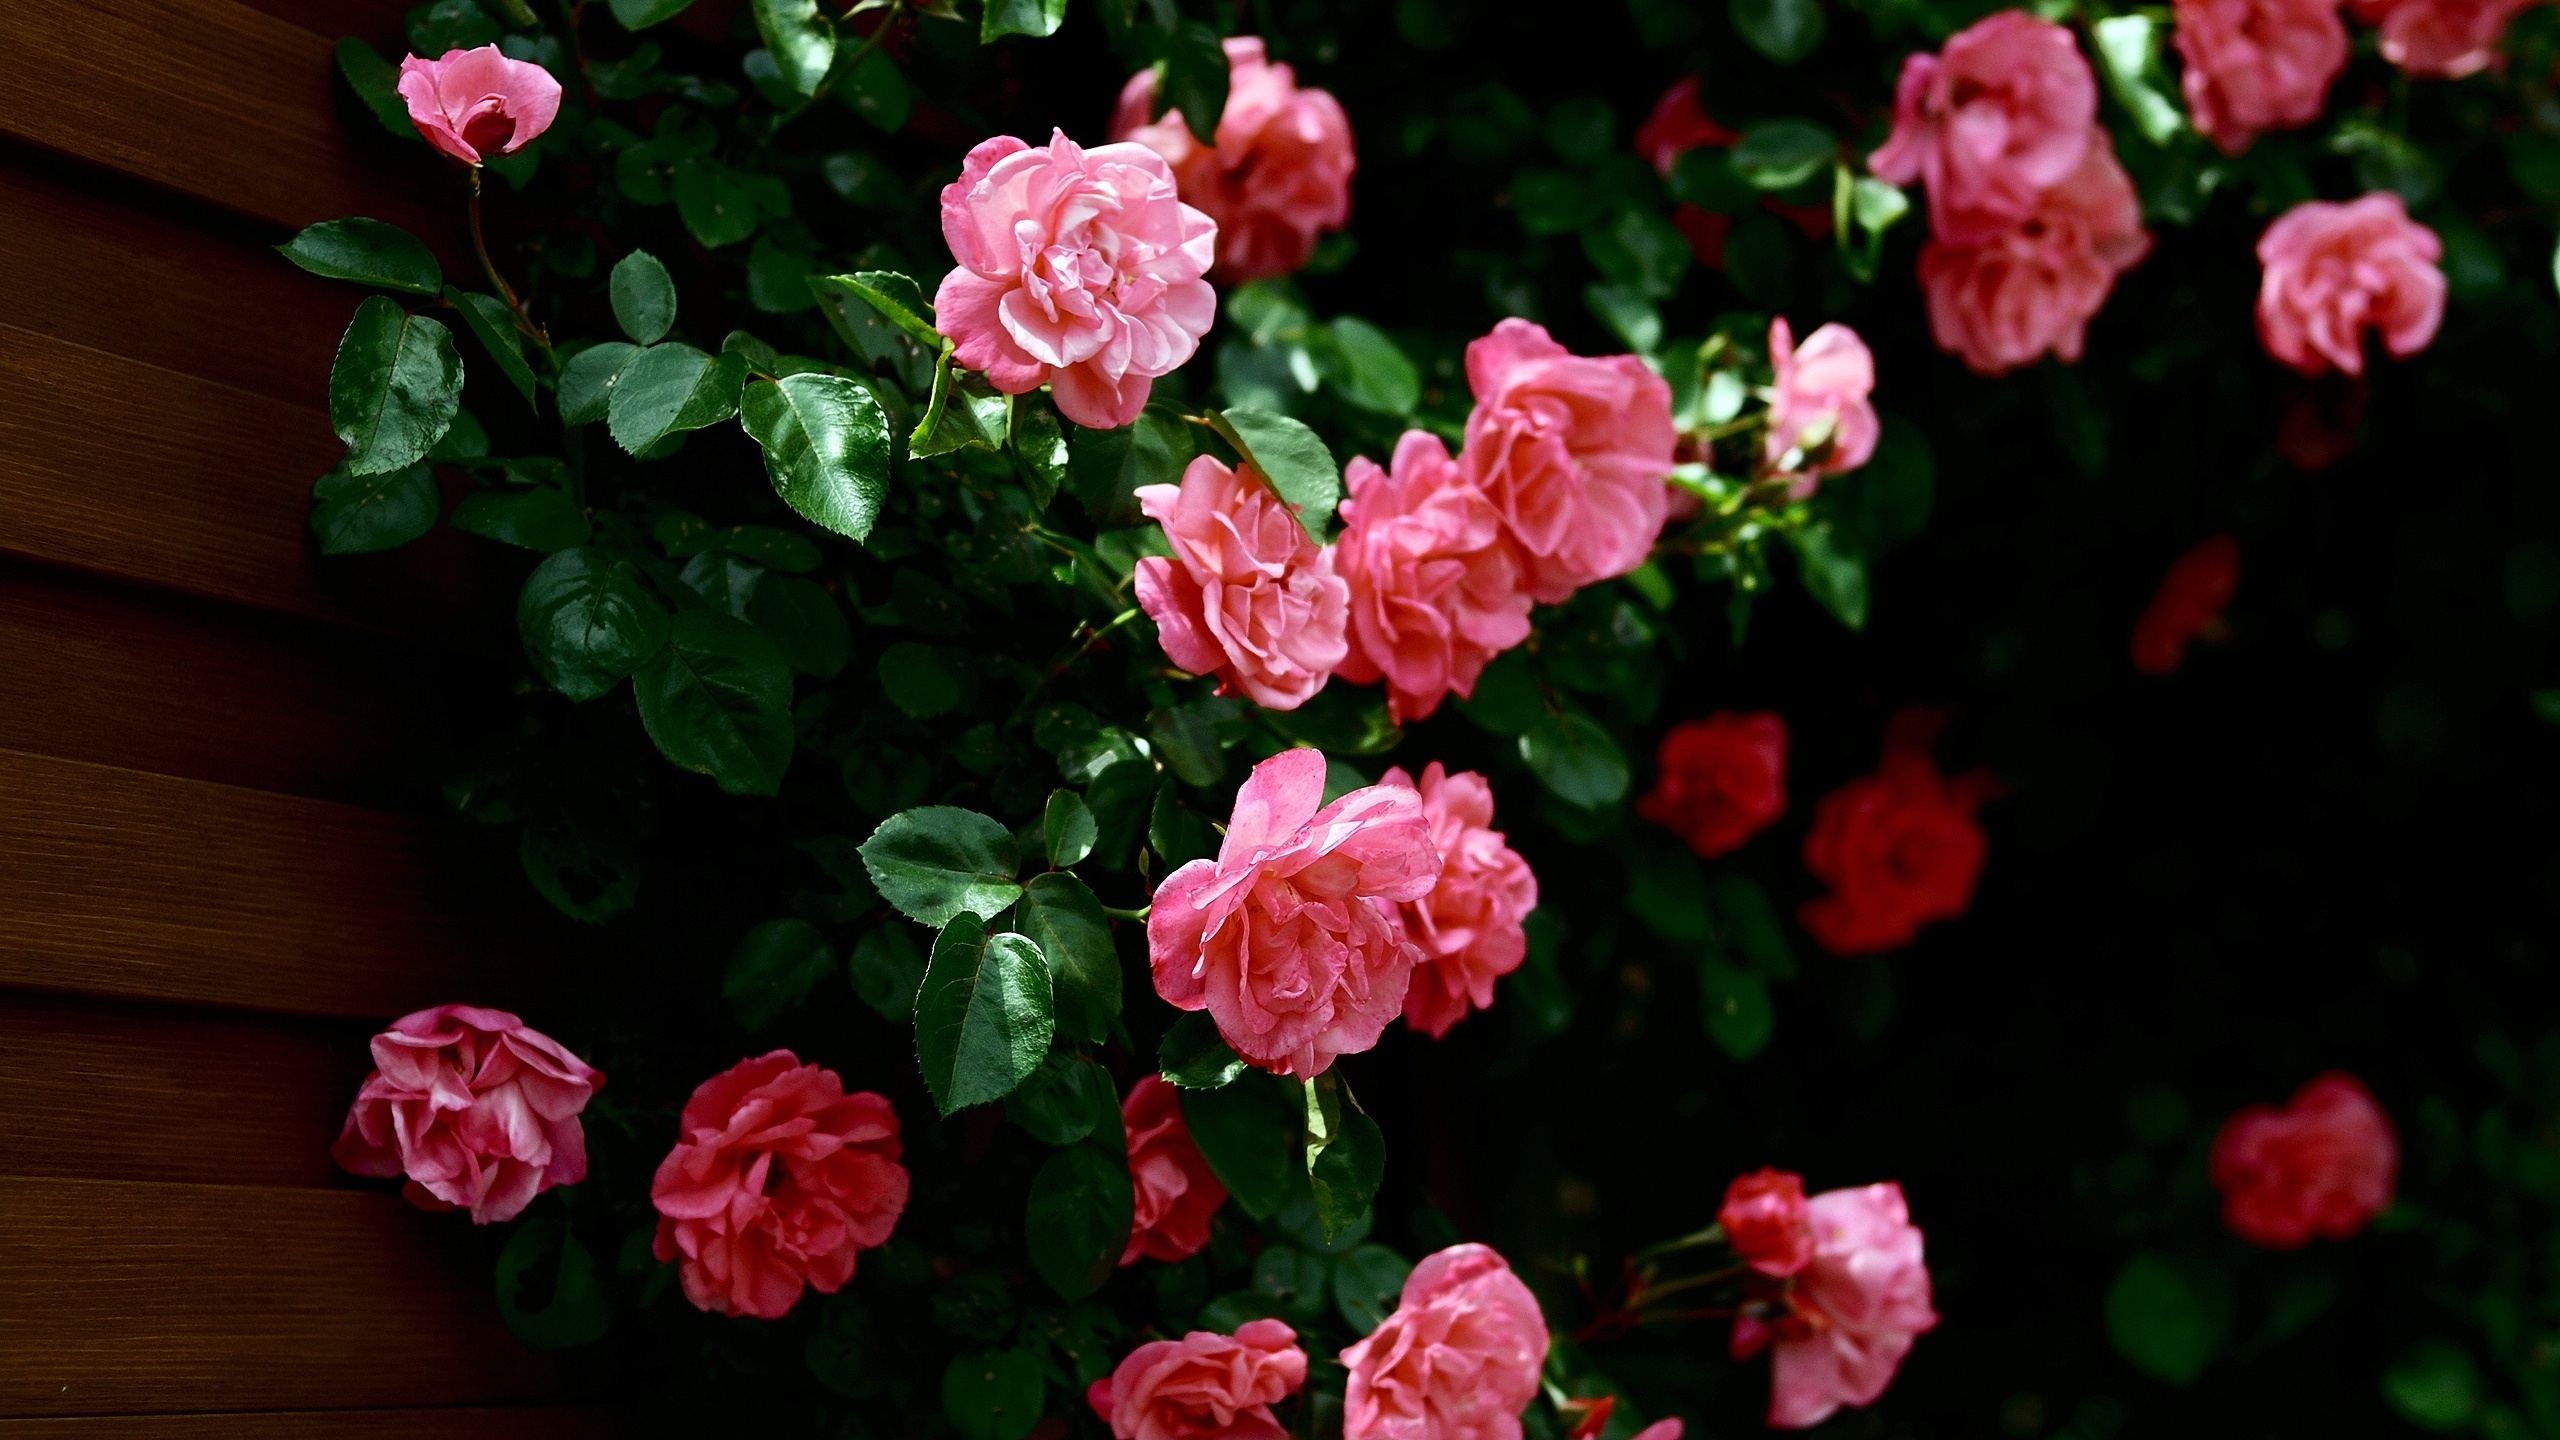 Very Nice Roses for 2560x1440 HDTV resolution